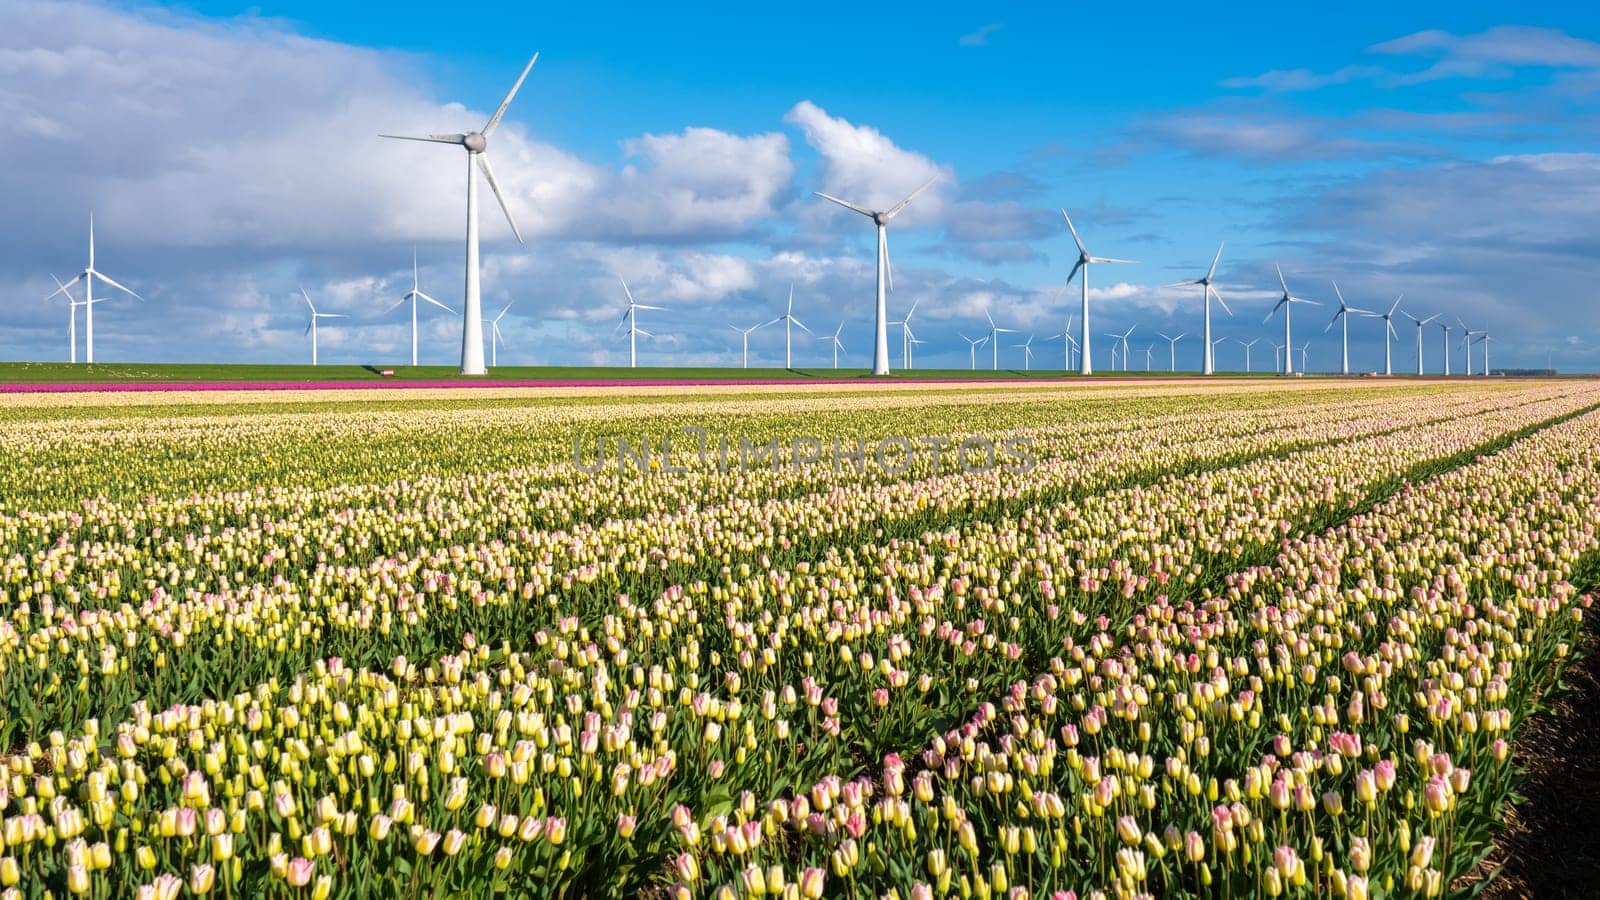 A vibrant field of tulips stretches out with elegant wind turbines spinning in the distance, capturing the essence of renewable energy and colorful nature by fokkebok